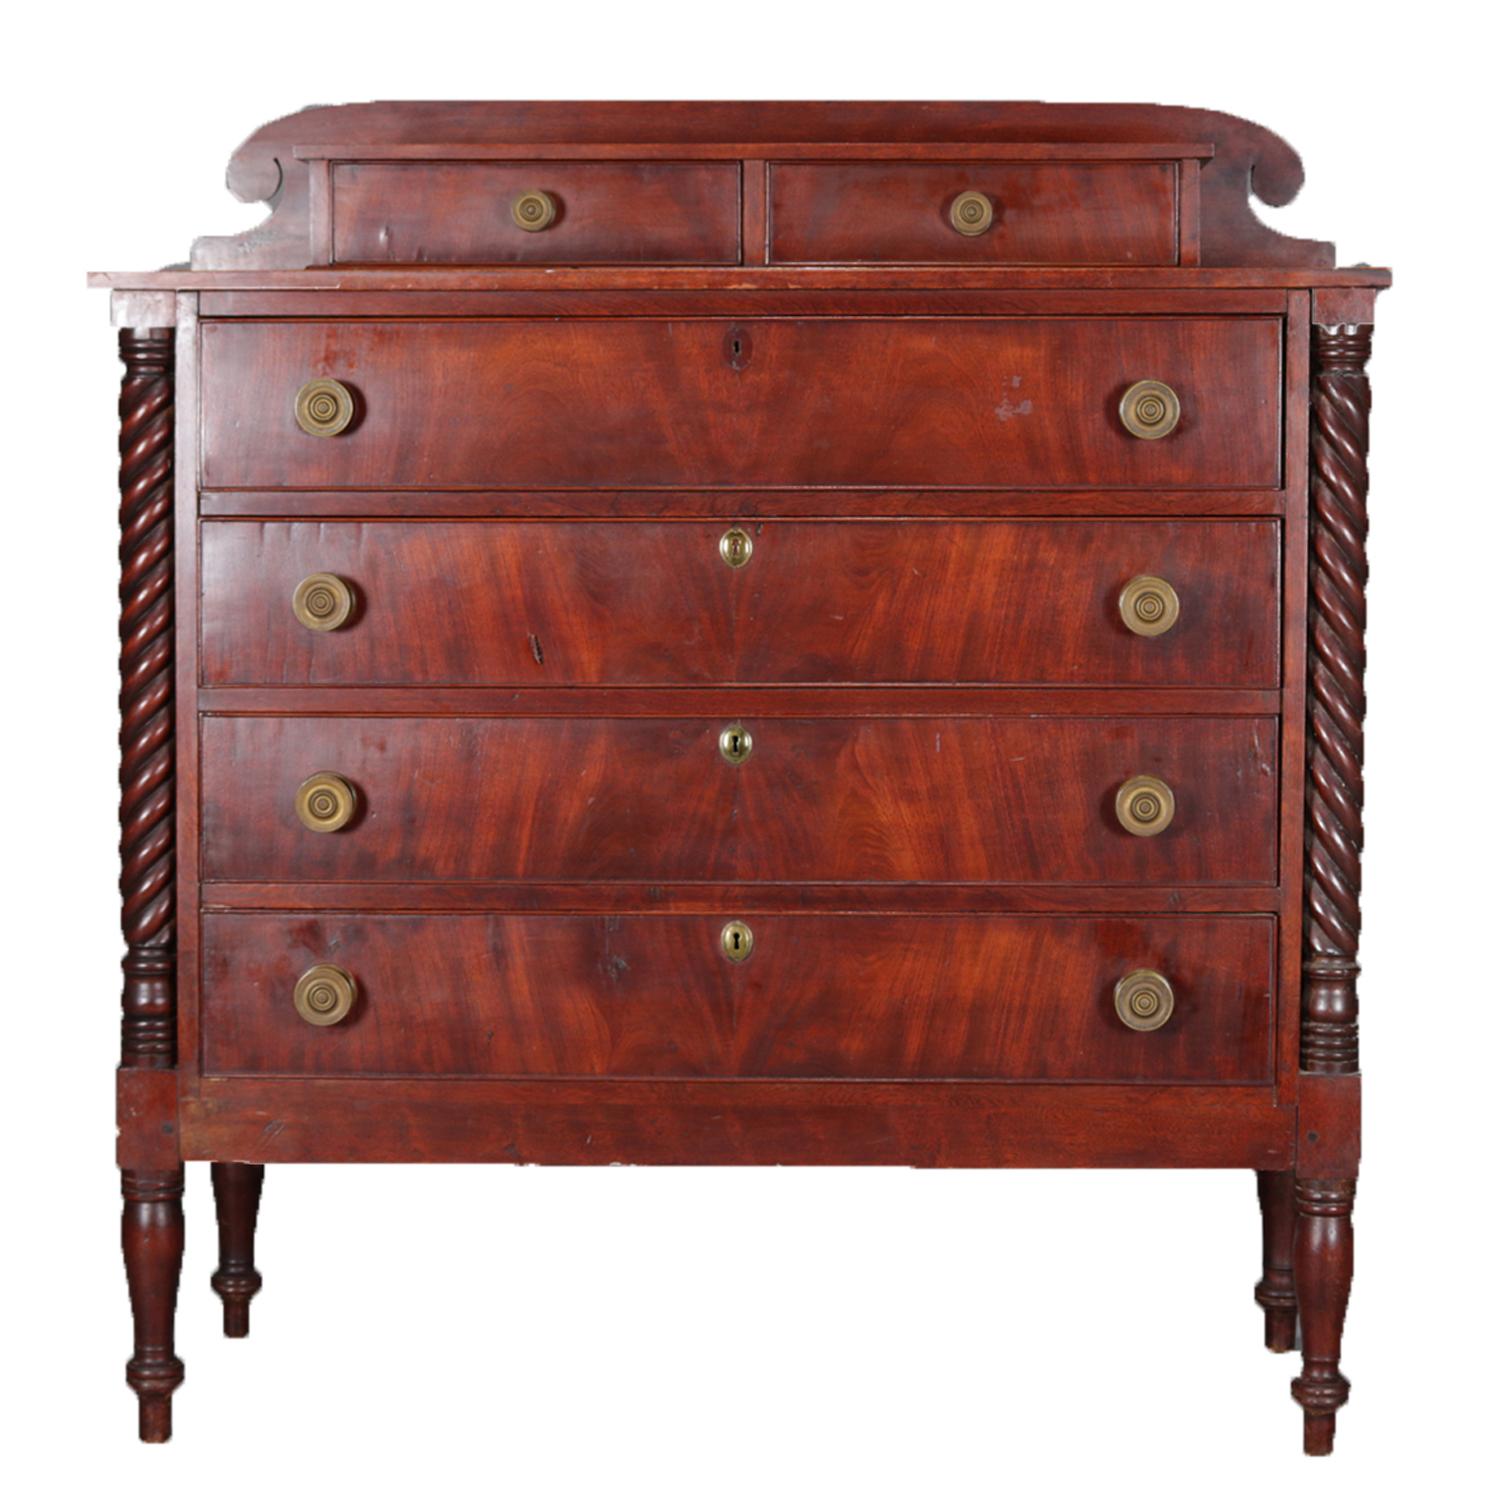 An antique Sheraton flame mahogany chest of drawers features shaped backsplash with two glove drawers over four bookmatched long drawers flanked by full rope twist columns and raised on turned feet, bronze pulls throughout, circa 1830.

Measures: